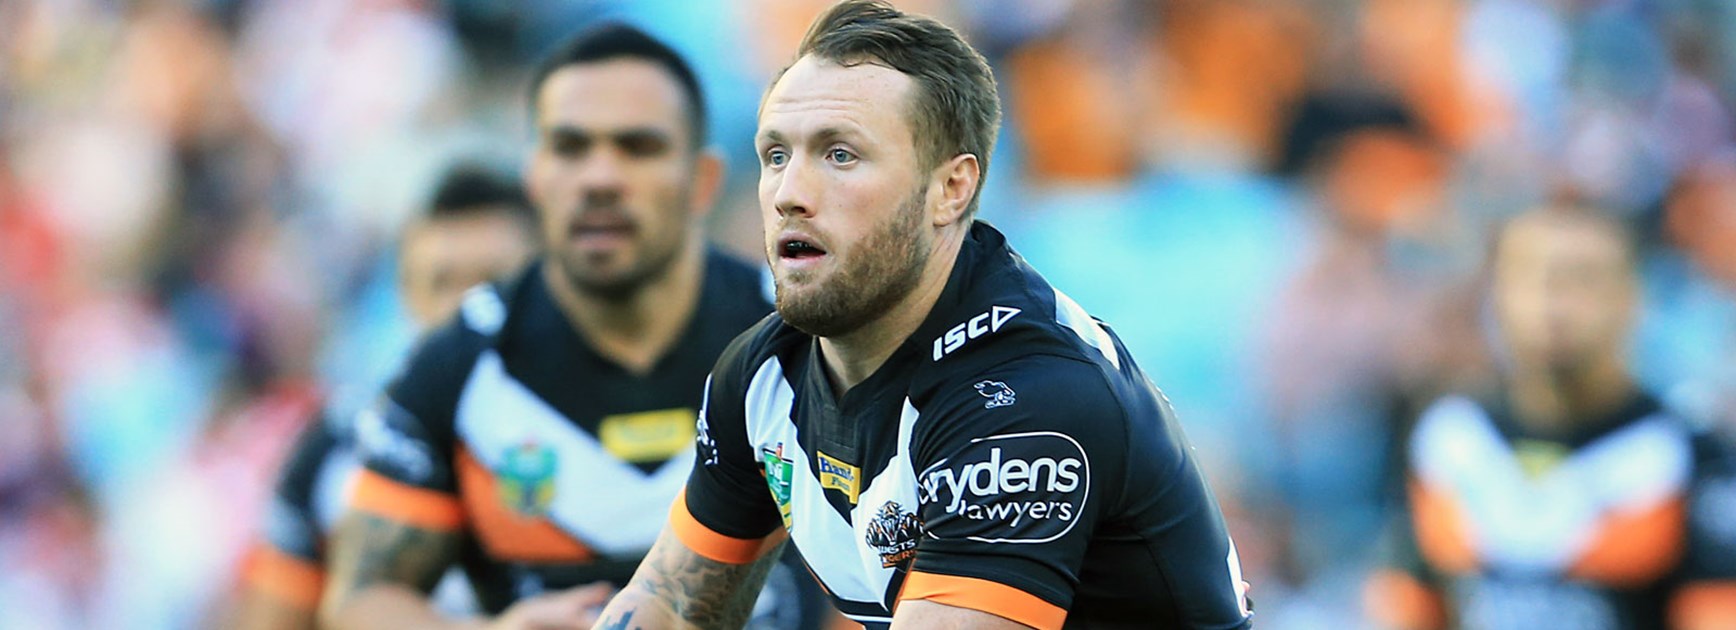 Wests Tigers winger Jordan Rankin against the Dragons in Round 20.